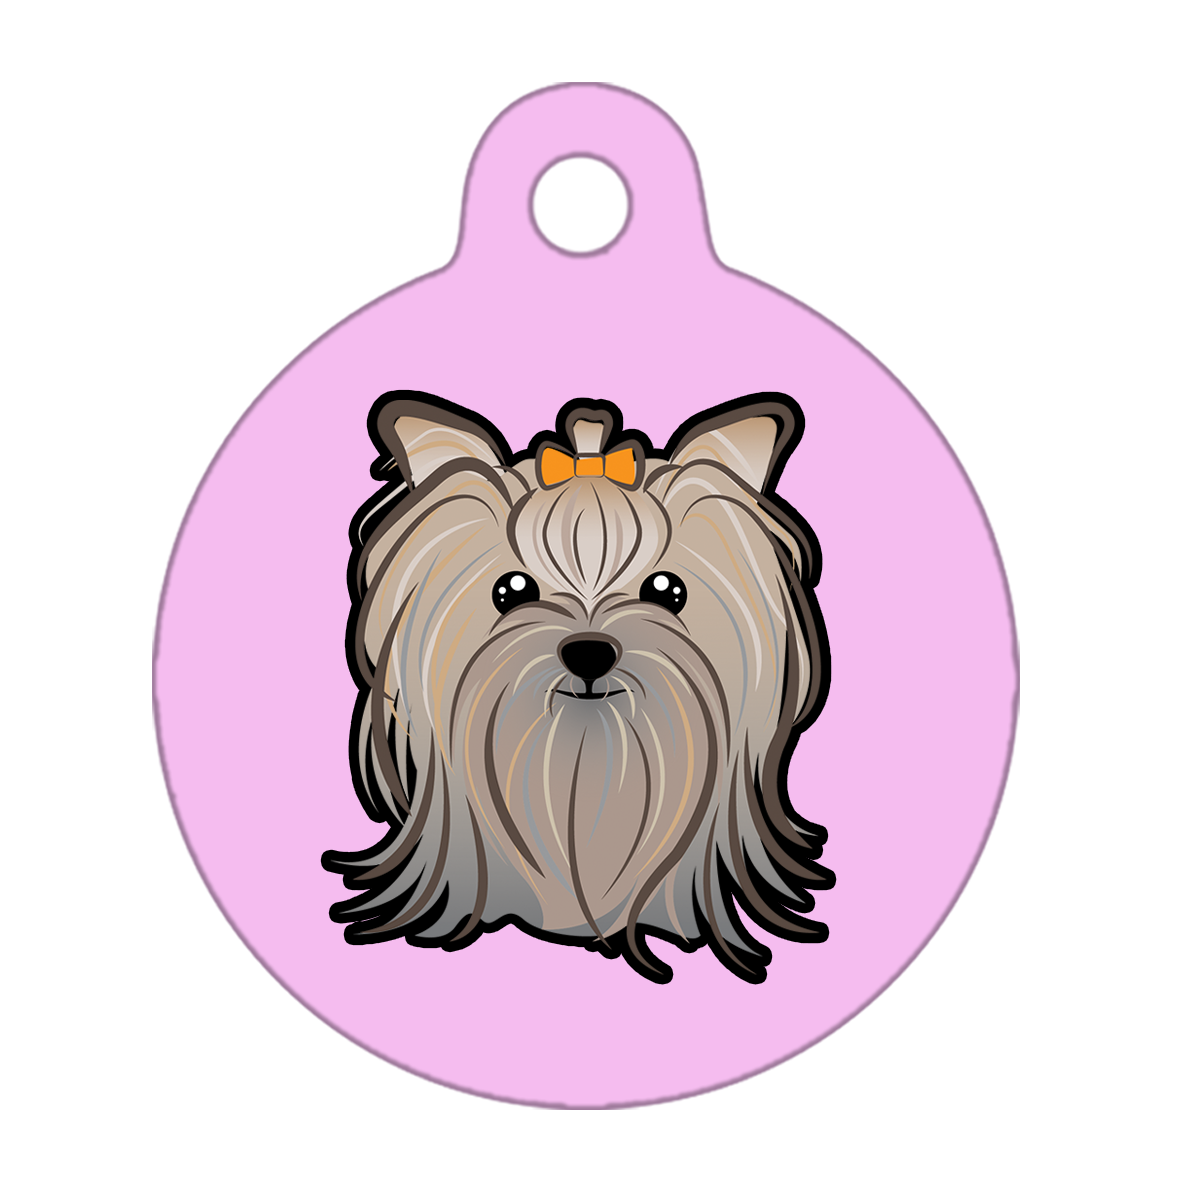 25mm Diameter Small Size - Yorkshire Terrier Dog